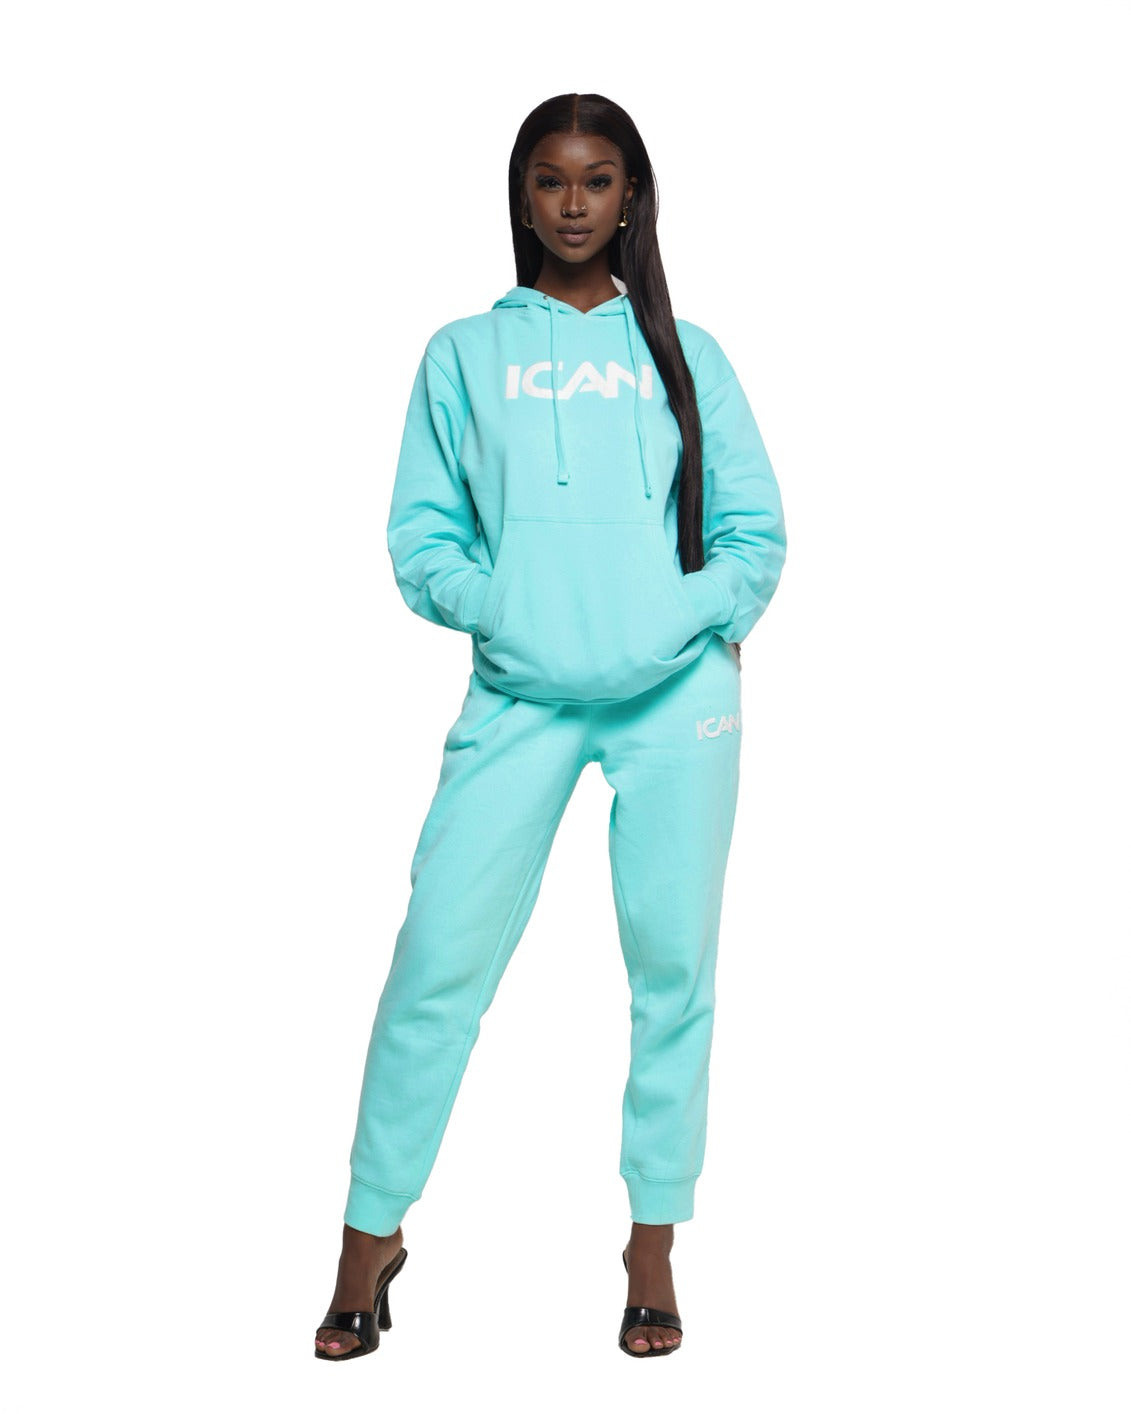 Baby Blue ICAN Jogger Set